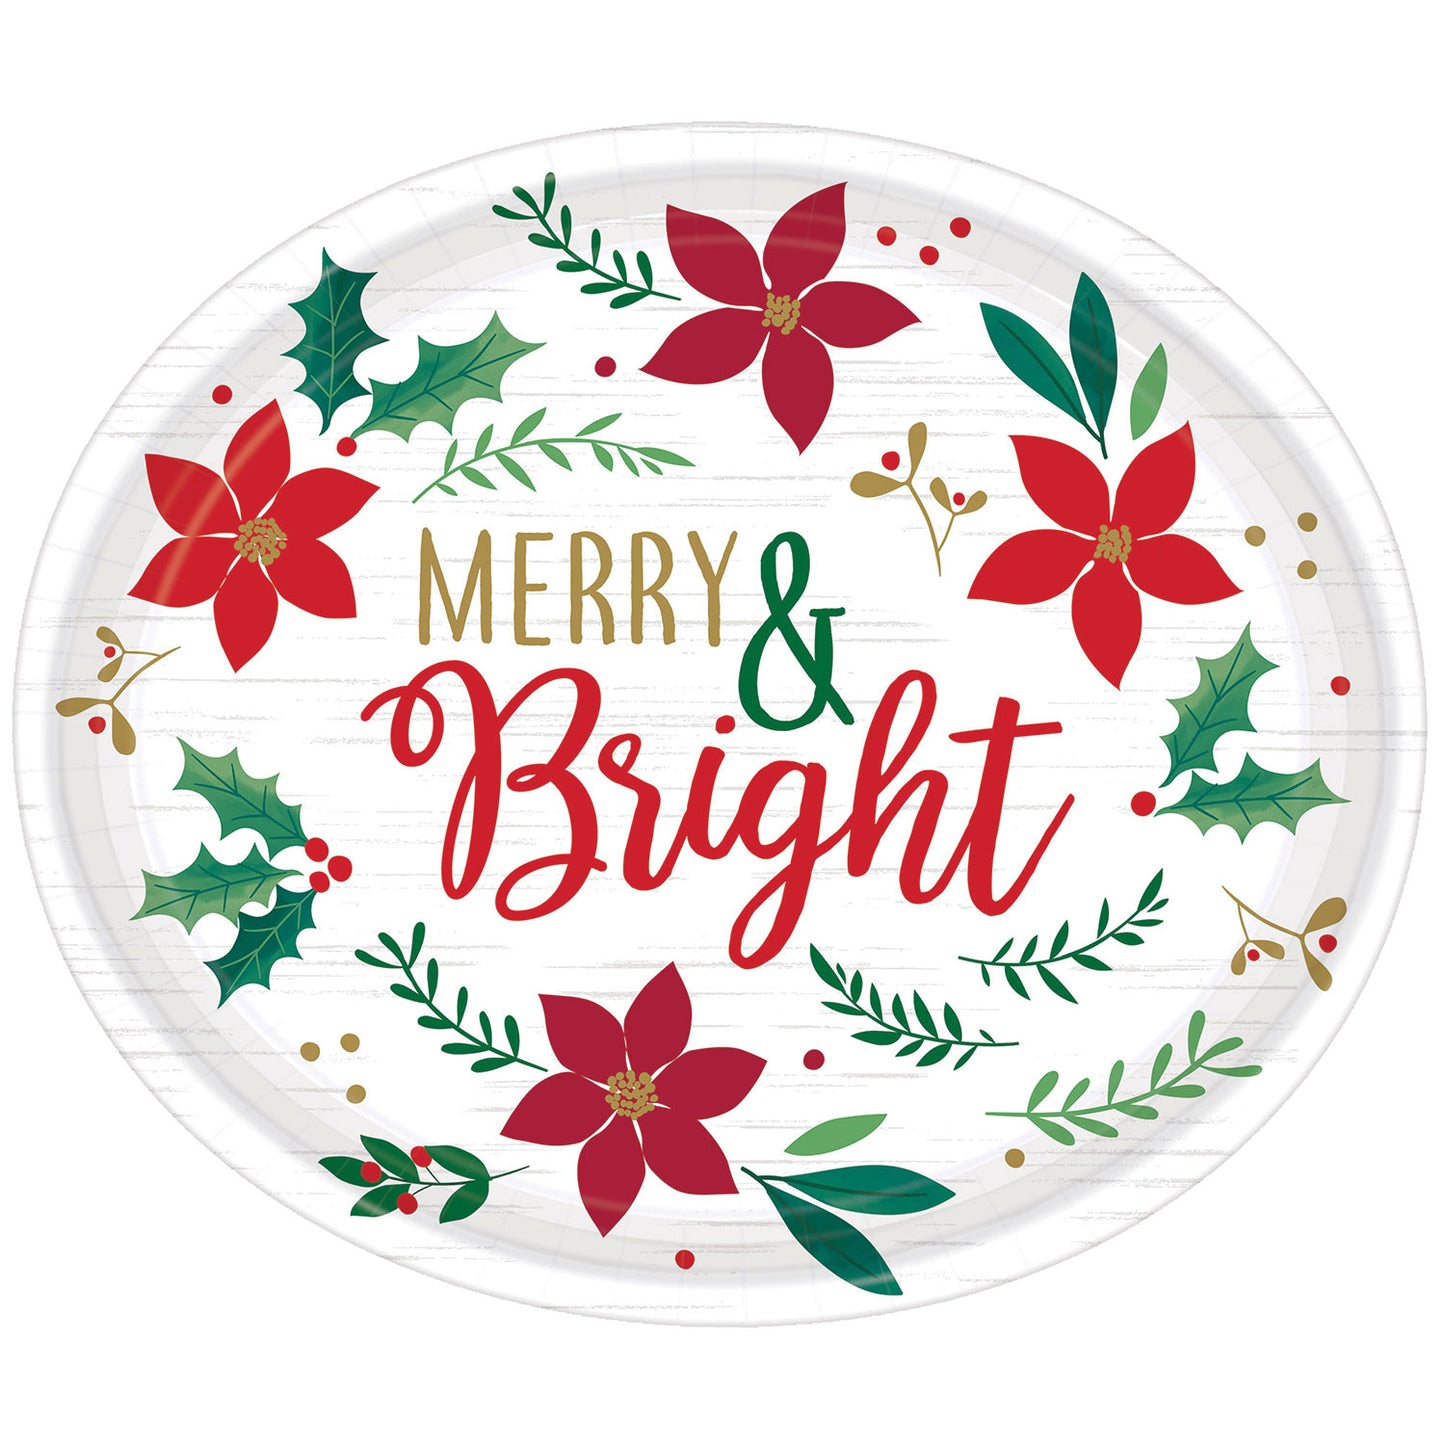 Christmas Wishes Oval Plates 30cm (8)